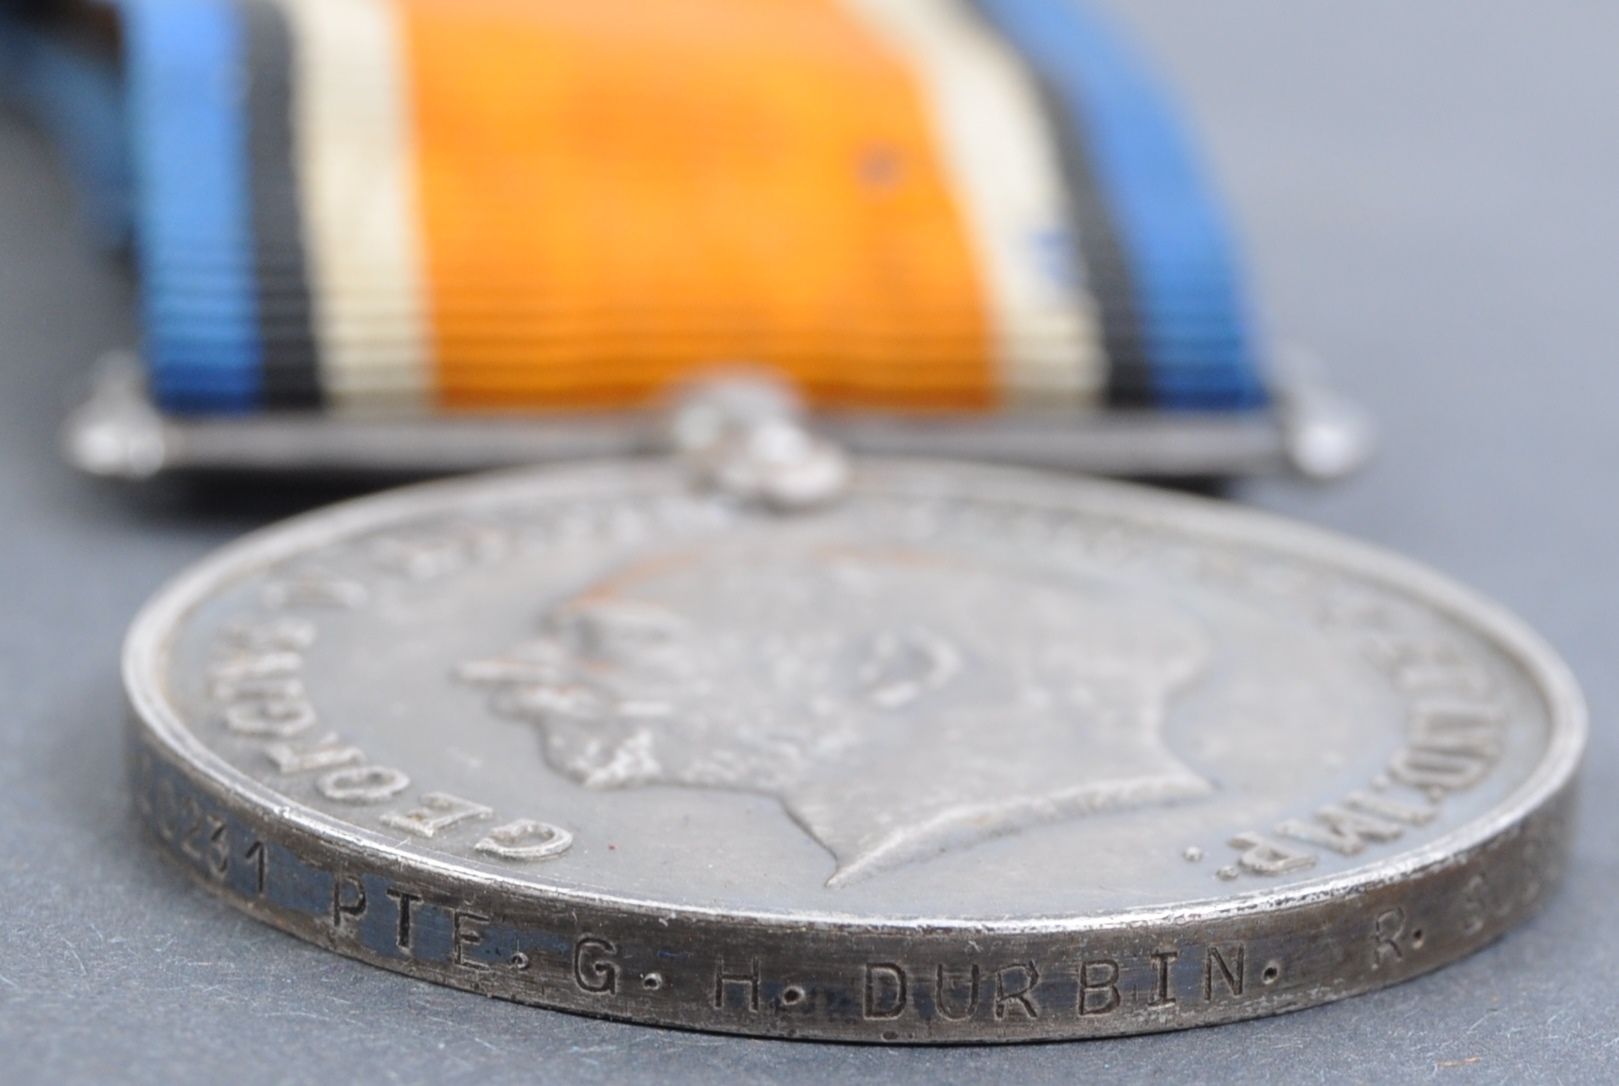 WWI FIRST WORLD WAR MEDAL PAIR & EFFECTS - PRIVATE IN ROYAL SUSSEX RGMT - Image 7 of 8